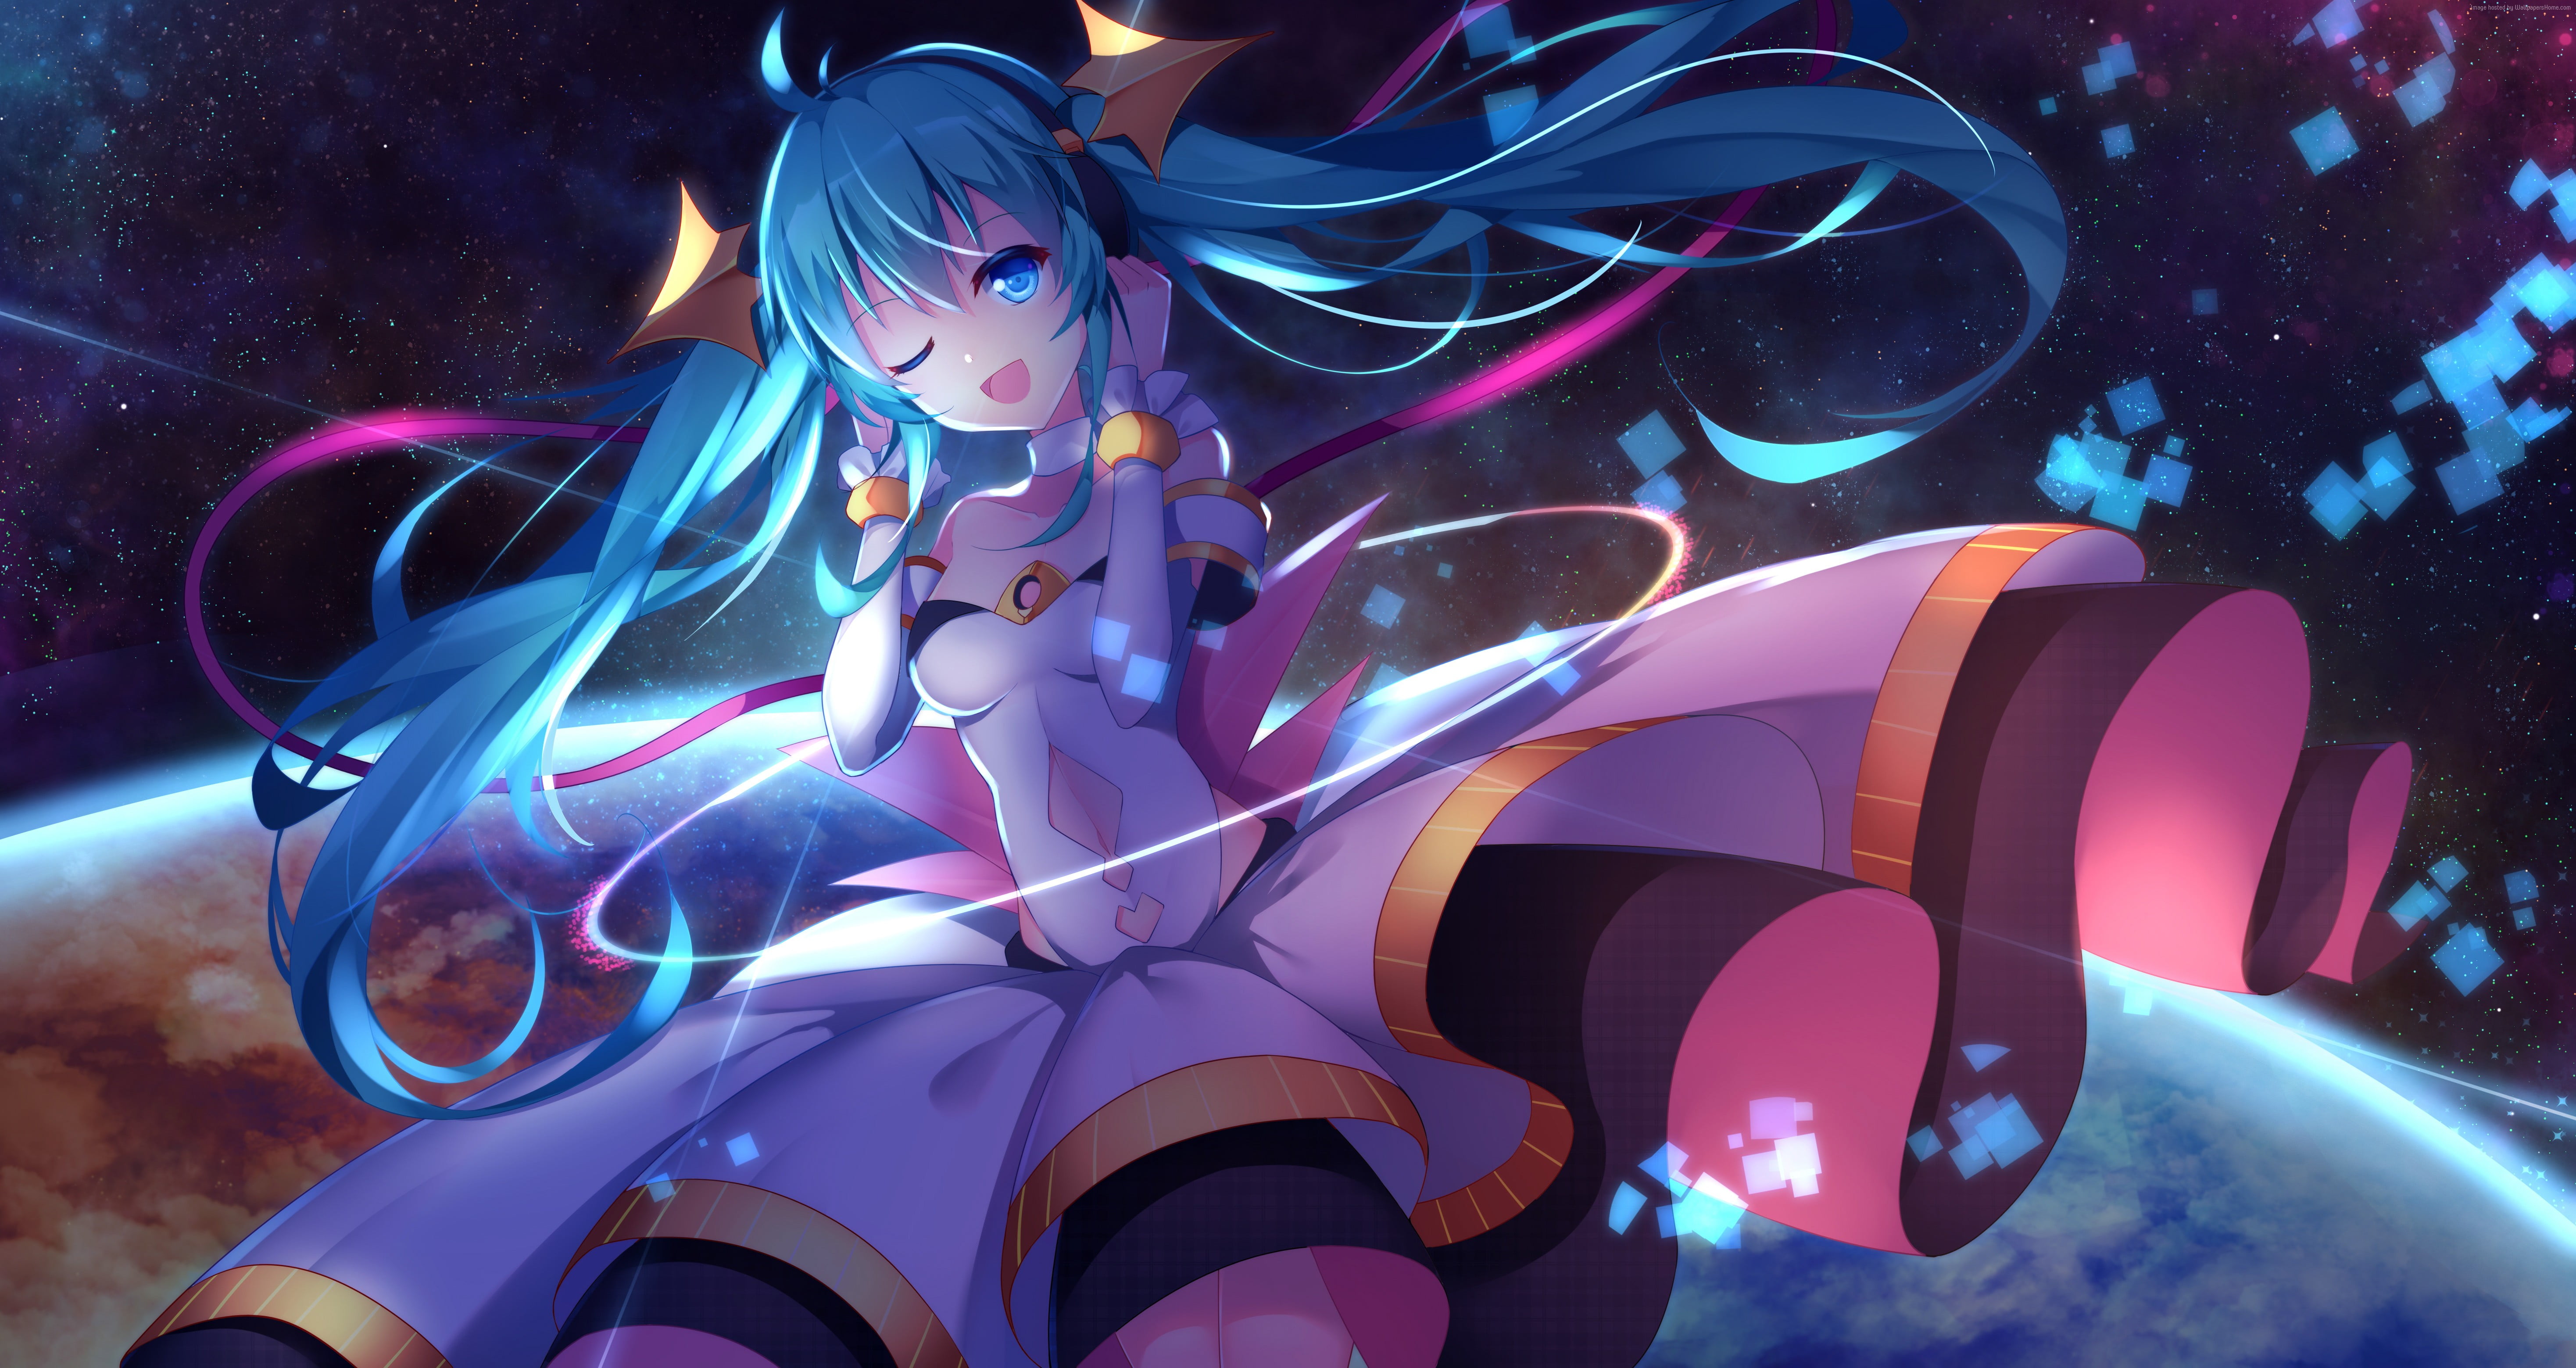 8. "Anime girl" by Hatsune Miku (song featuring an anime girl) - wide 5